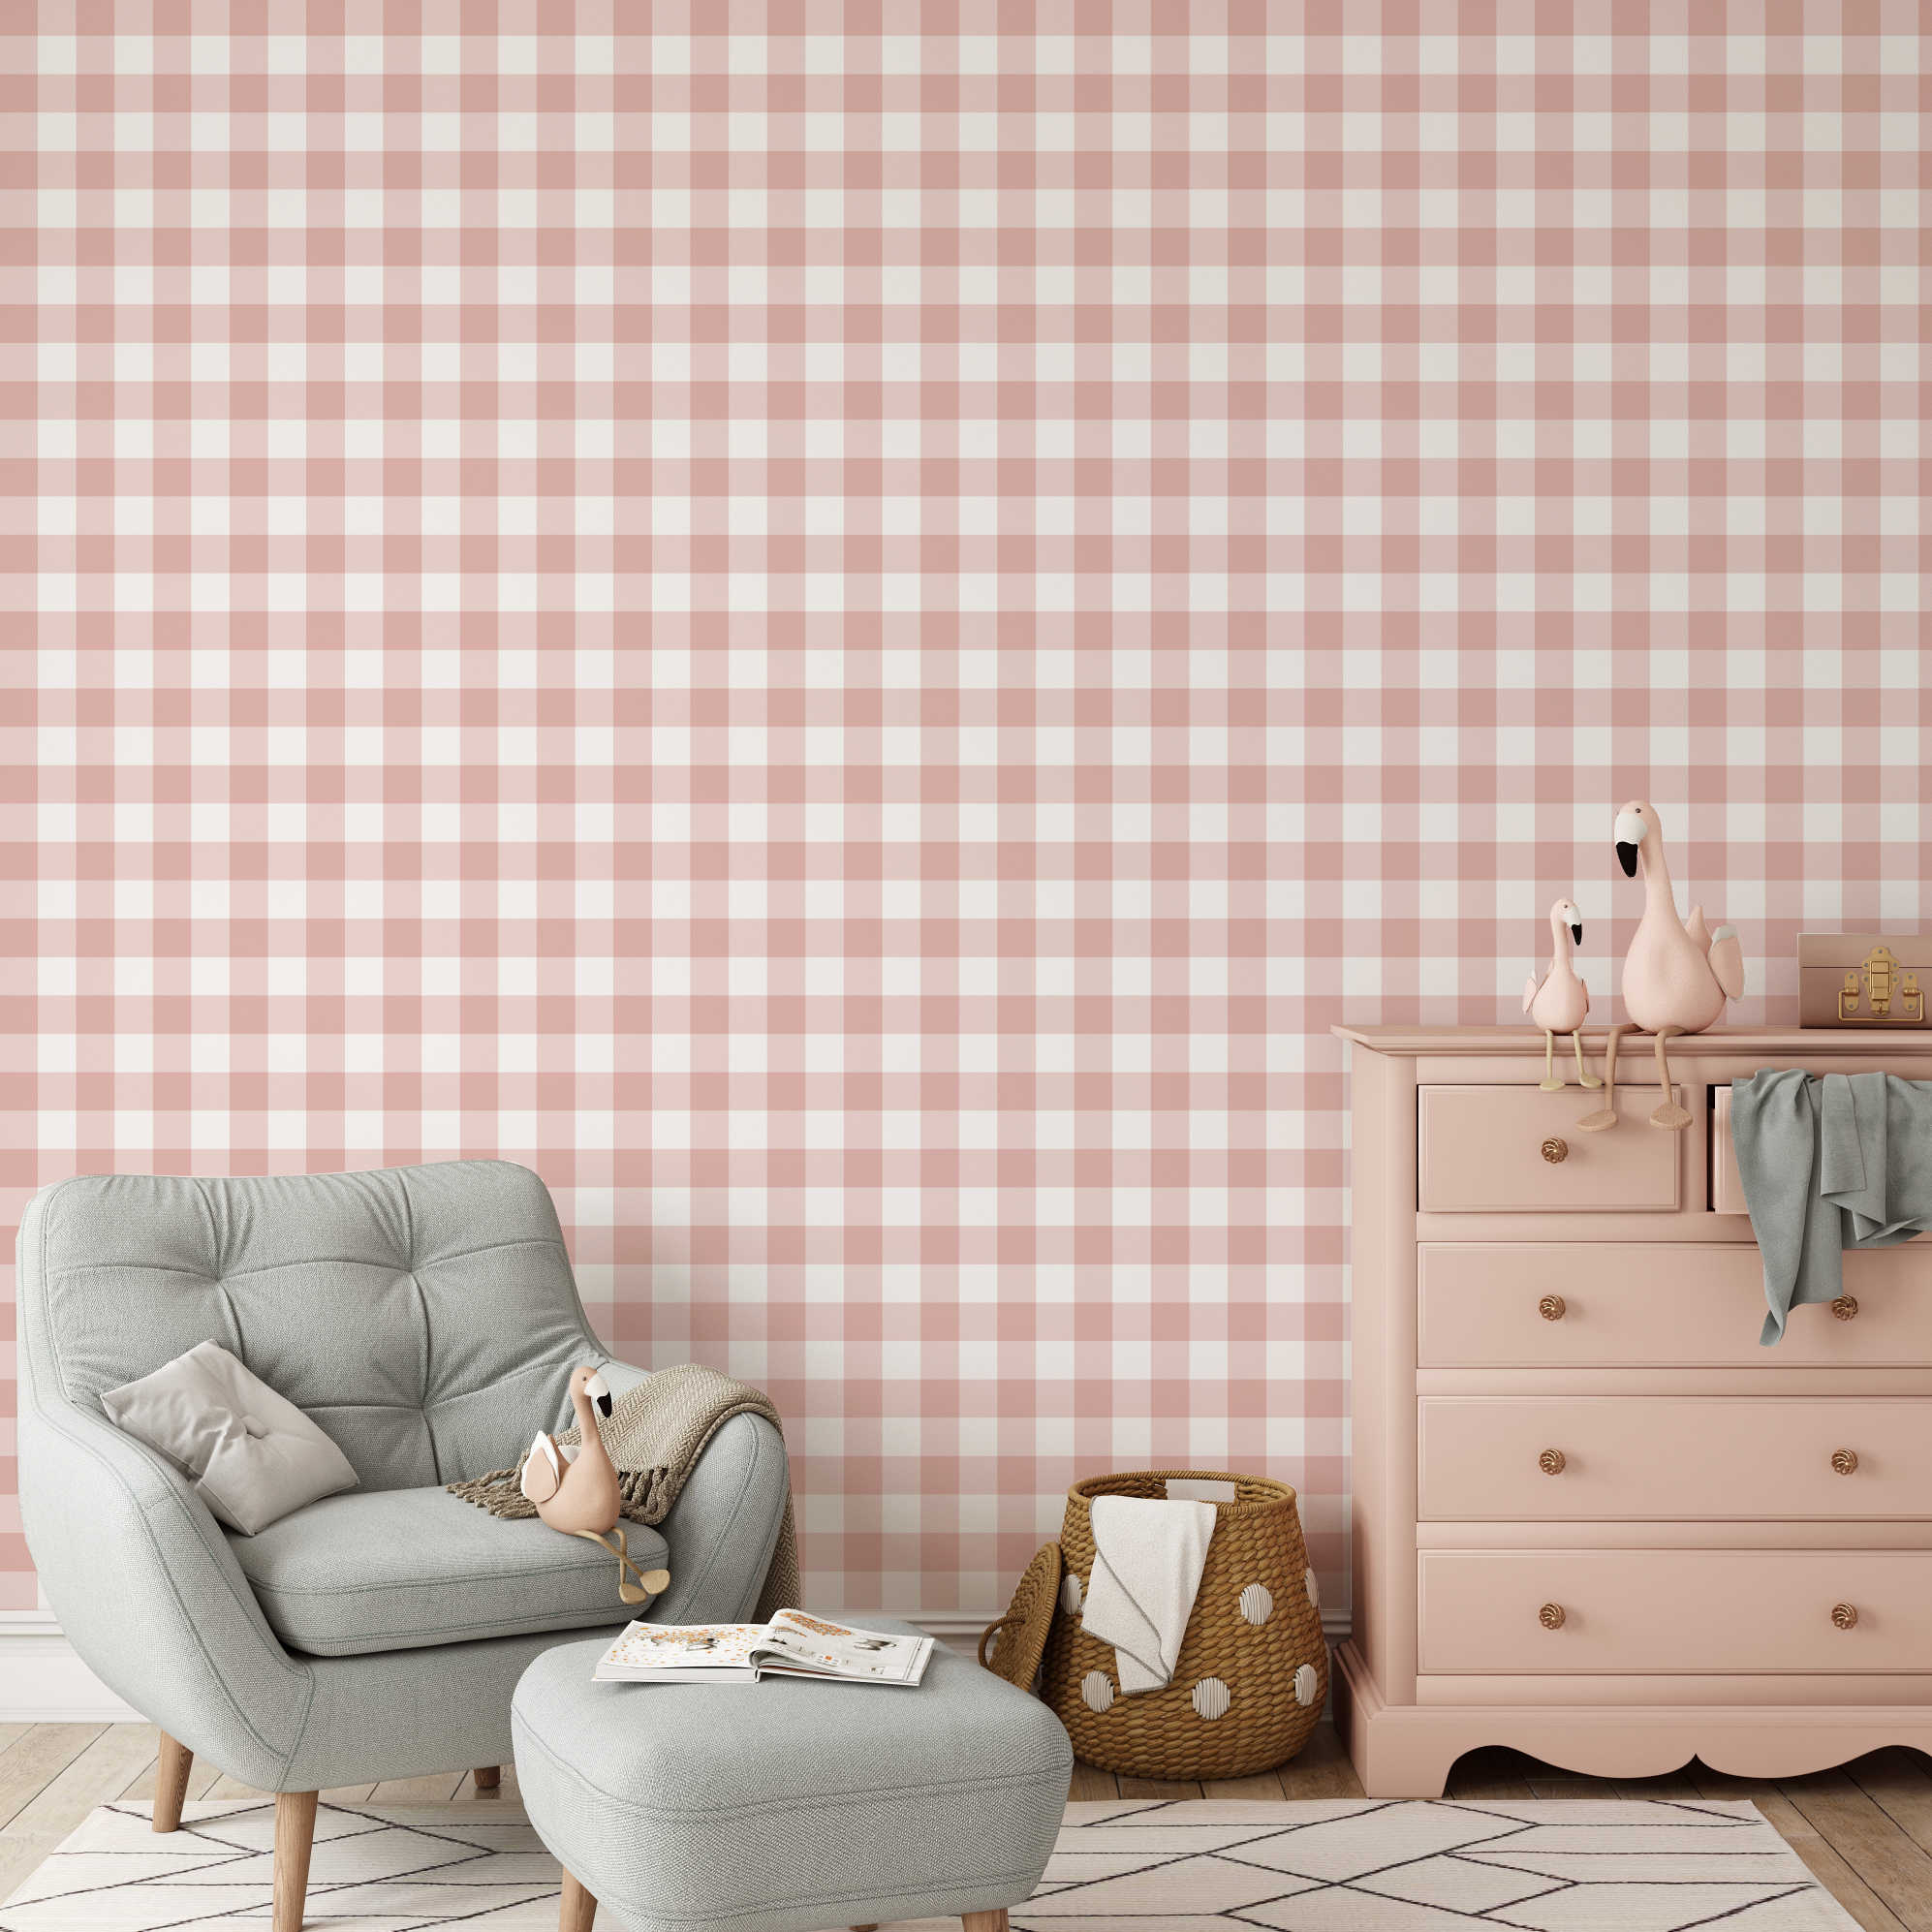 Gingham and Rose Pink Bedroom